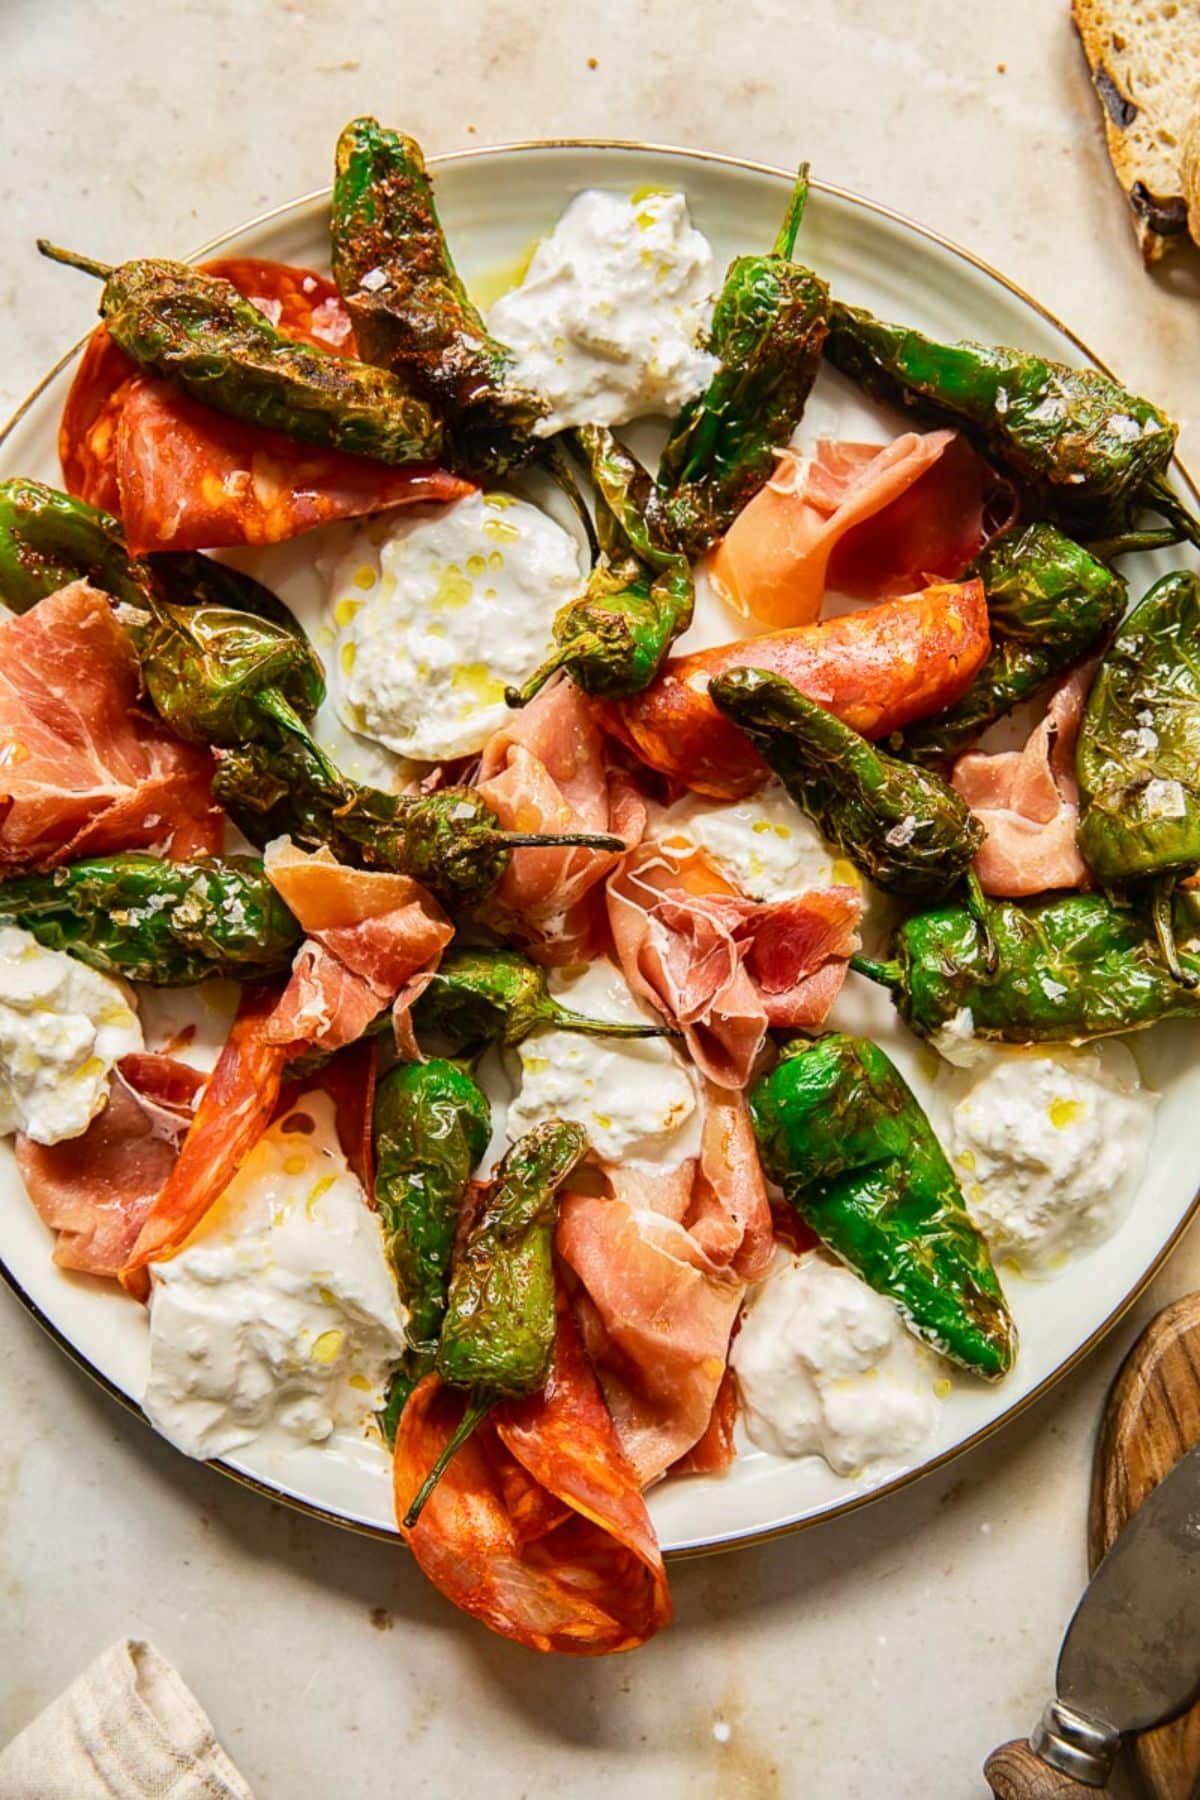 Scrumptious Padron Peppers, serrano ham and manchego cheese on a tray.